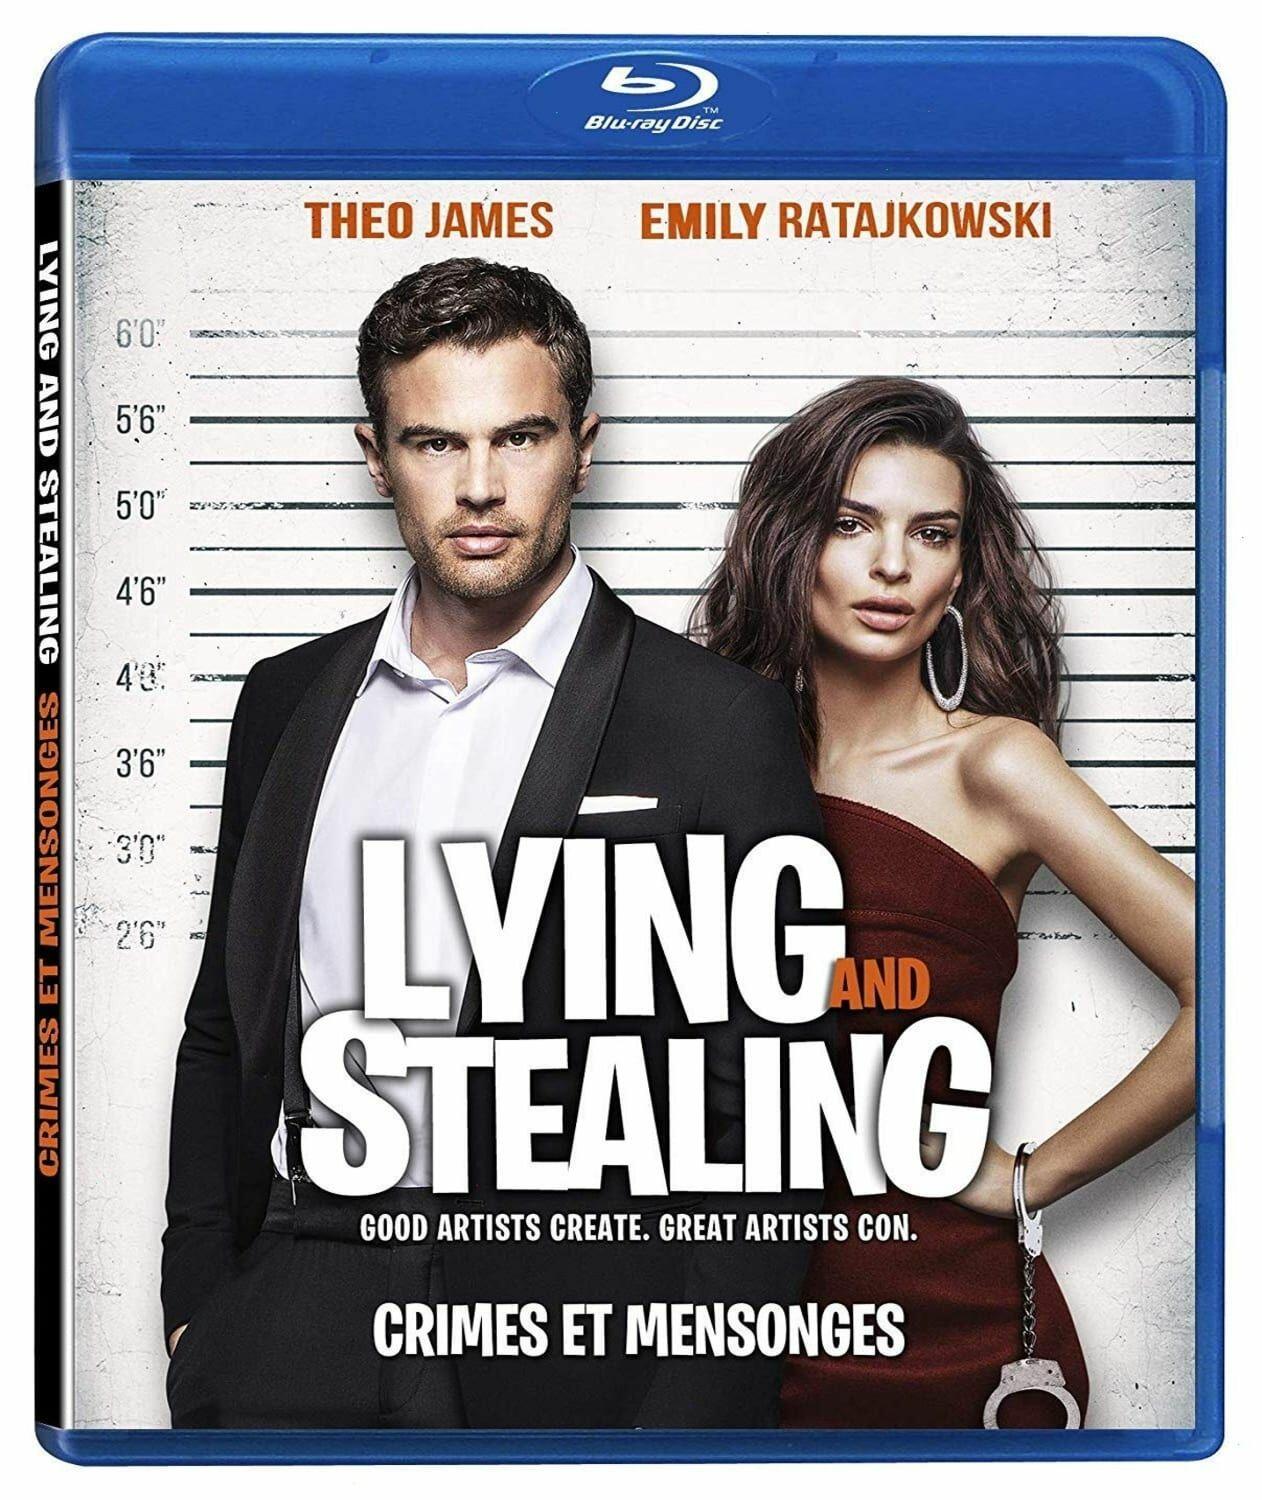 Lying and Stealing (Bluray) on MovieShack